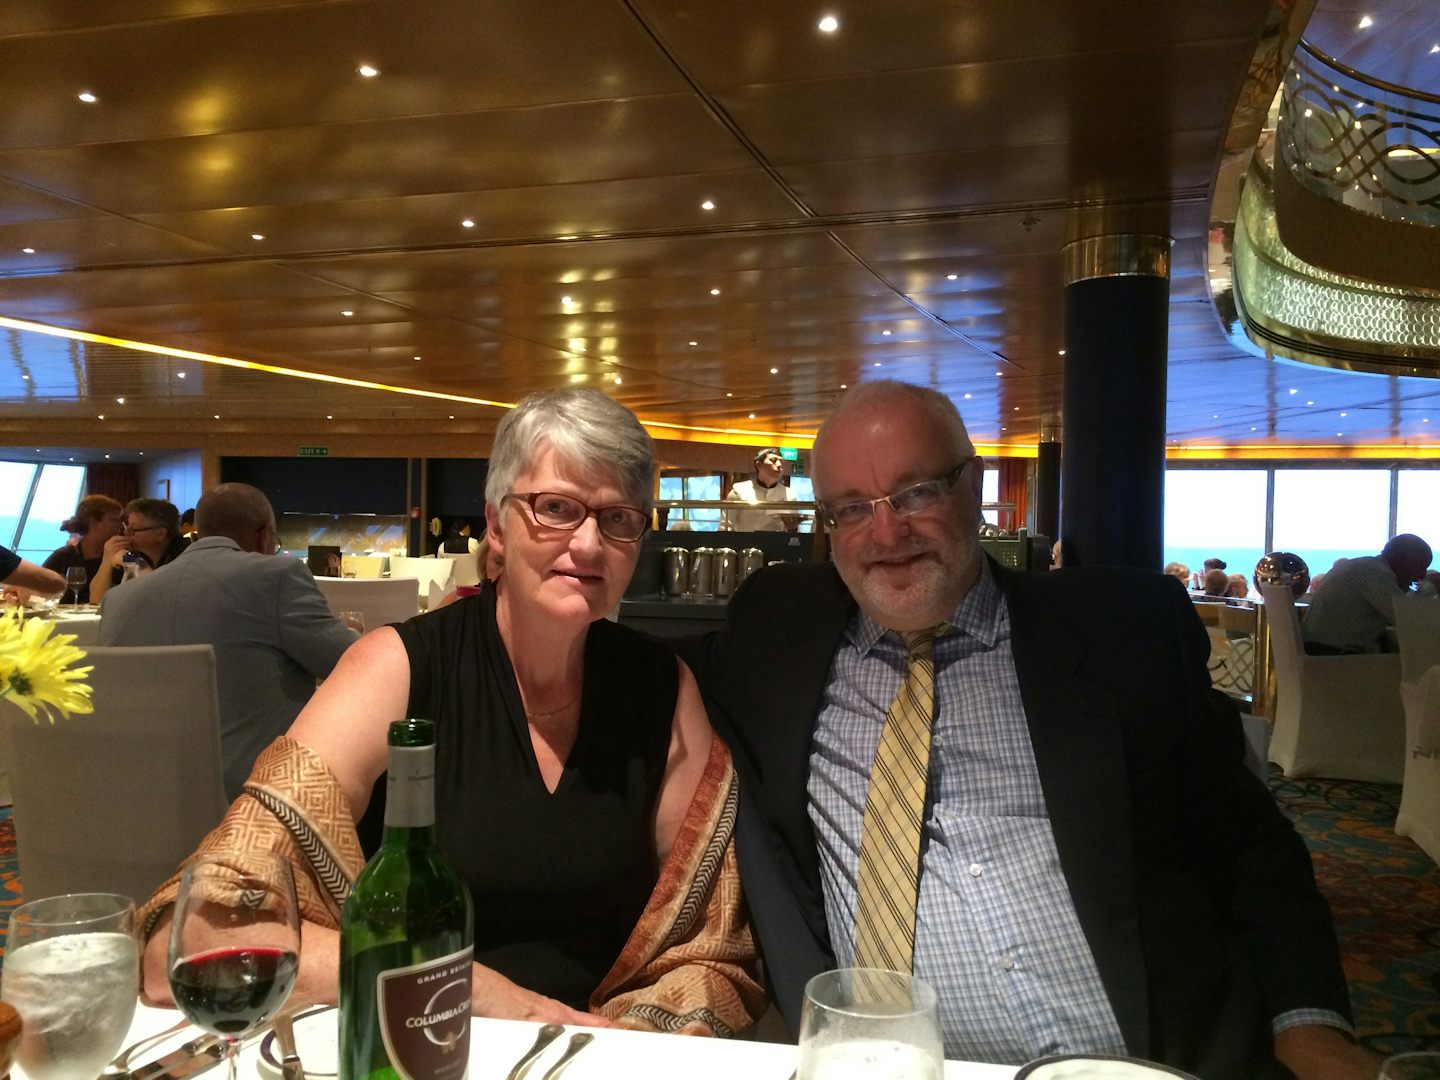 Gala diner in the 'Rotterdam' dining hall on board the MS Volendam